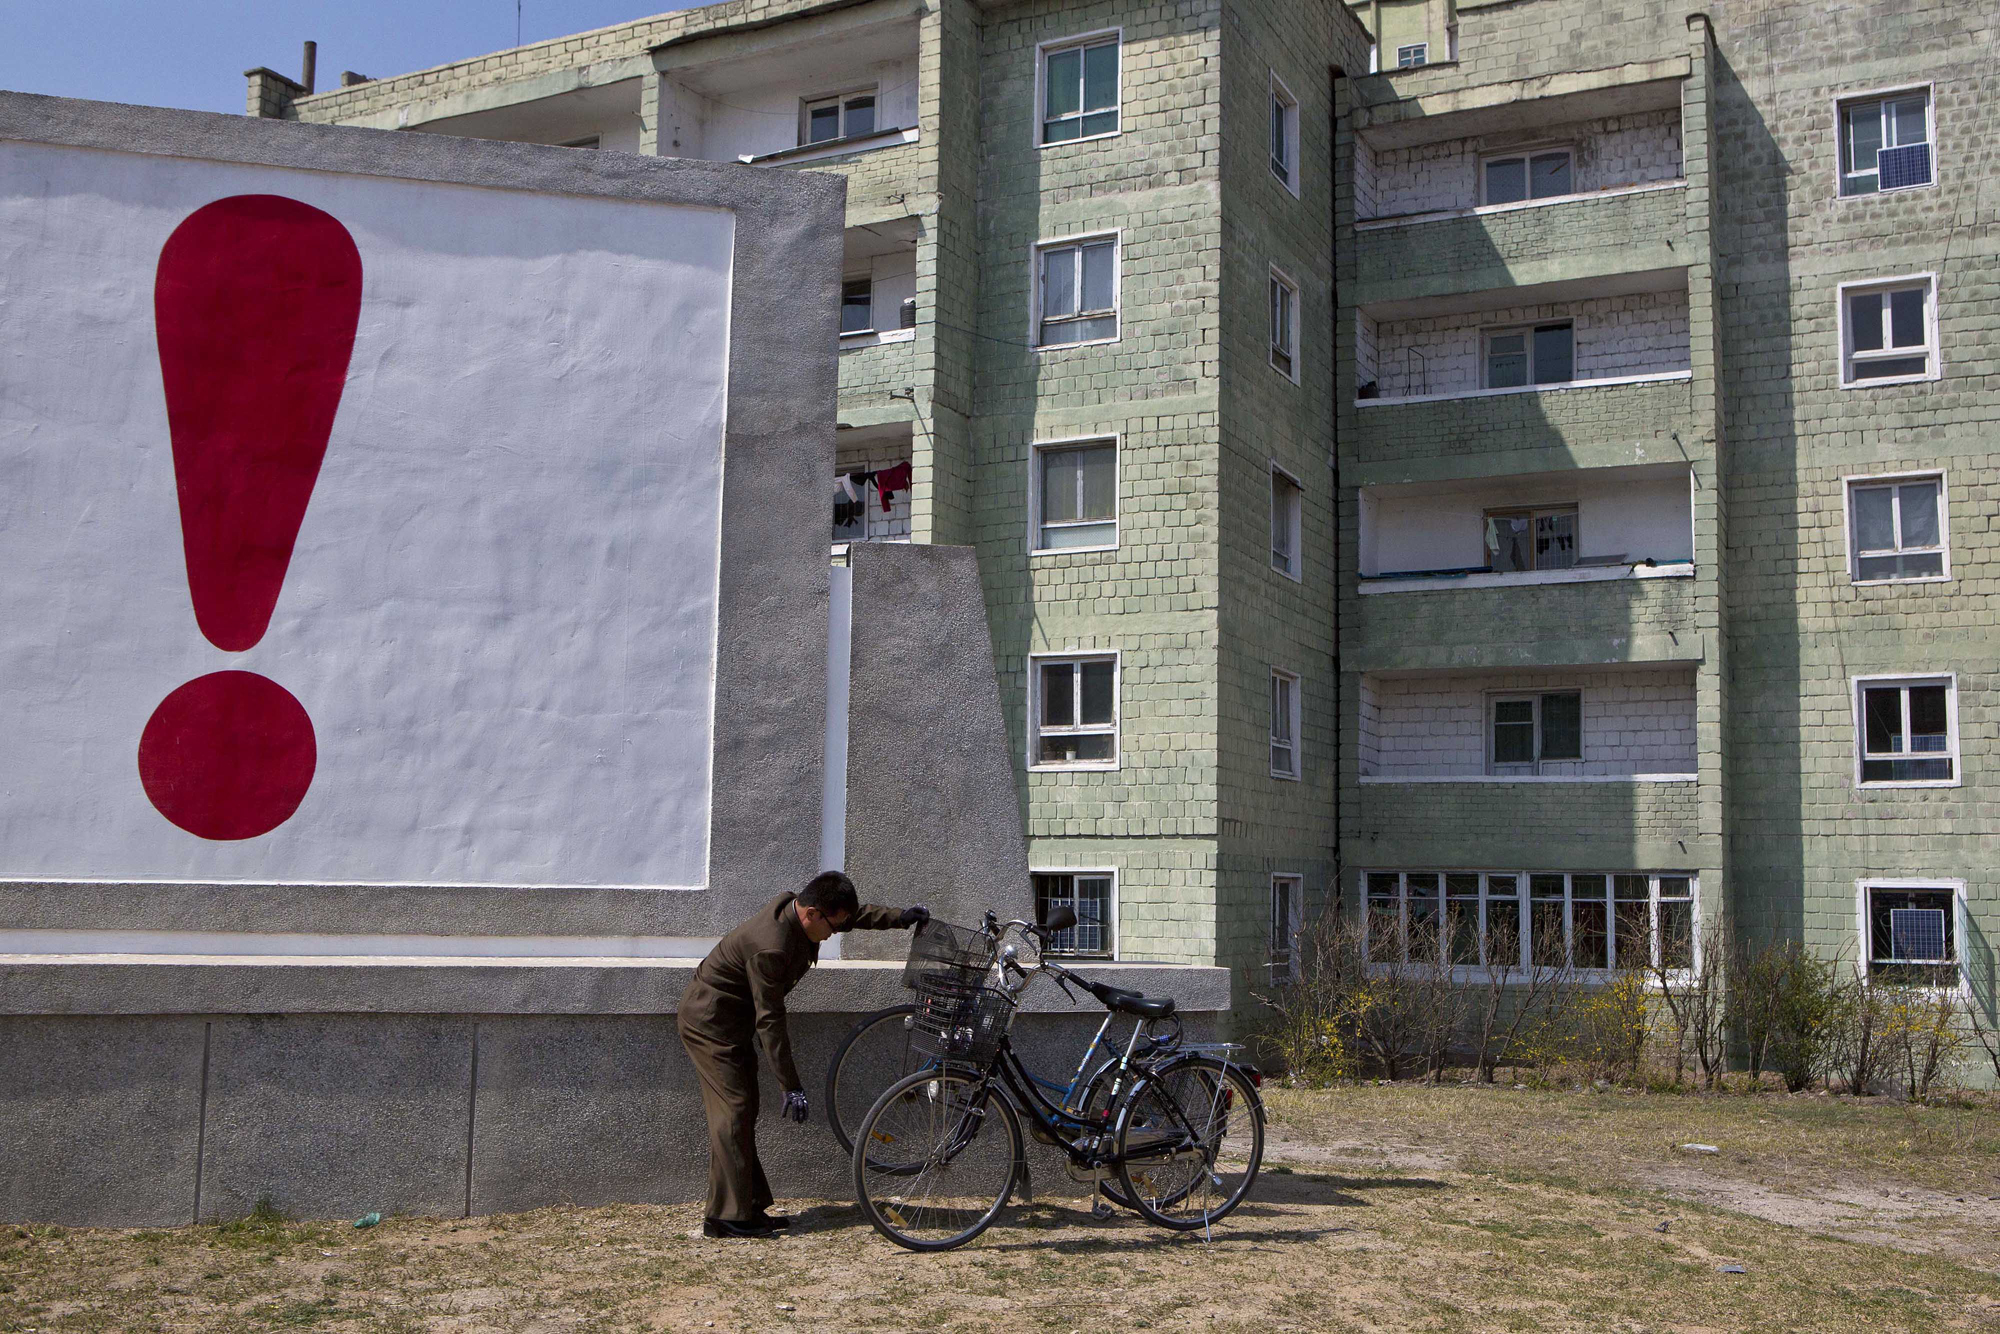 A North Korean man checks his bicycle next to a painted exclamation point on a propaganda billboard on April 24, 2013 in Kaesong, North Korea, north of the demilitarized zone which separates the two Koreas.